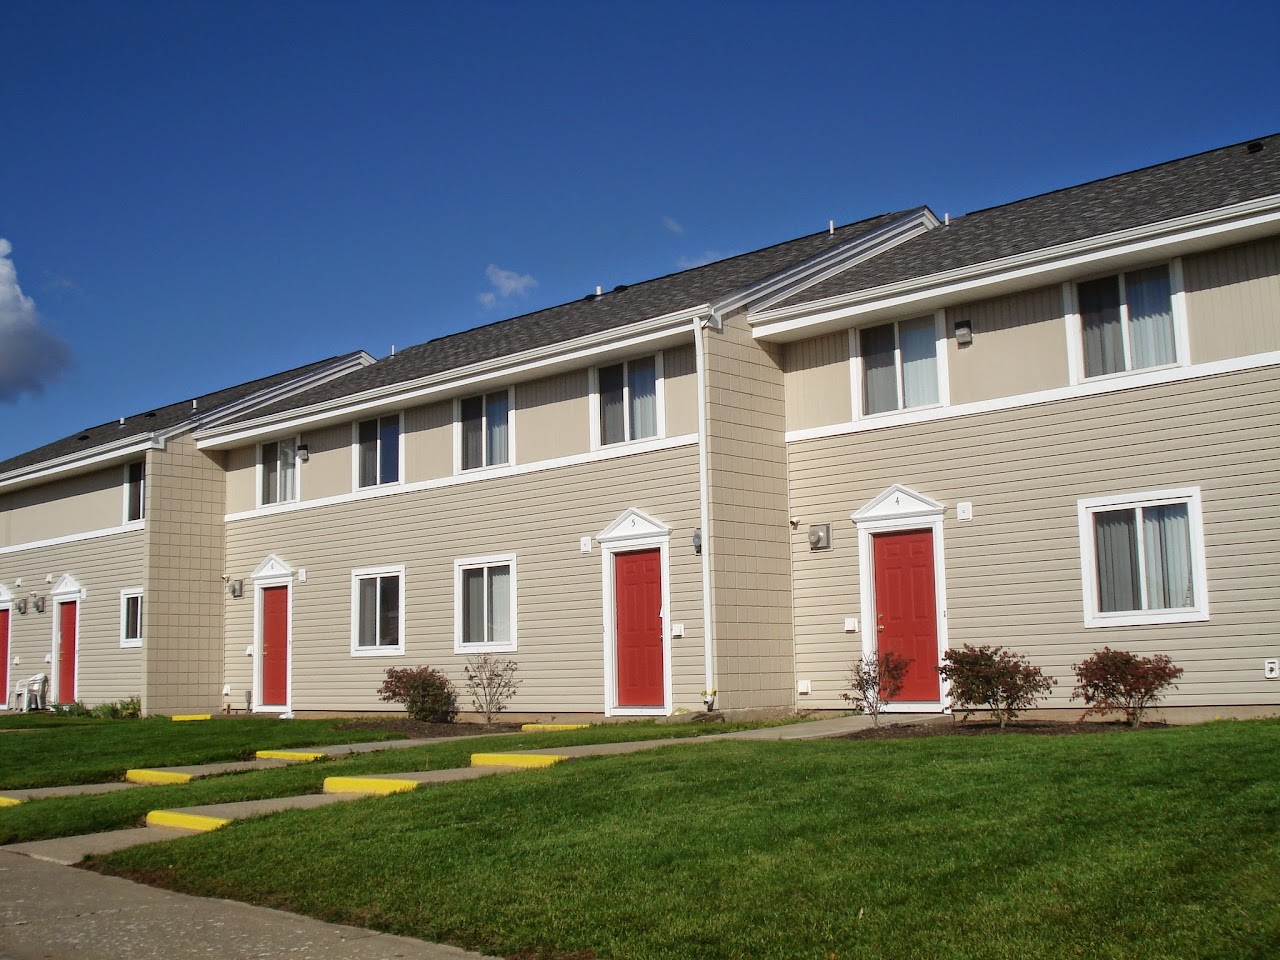 Photo of FOXWOOD PLACE. Affordable housing located at 6110 RUHLMANN RD LOCKPORT, NY 14094